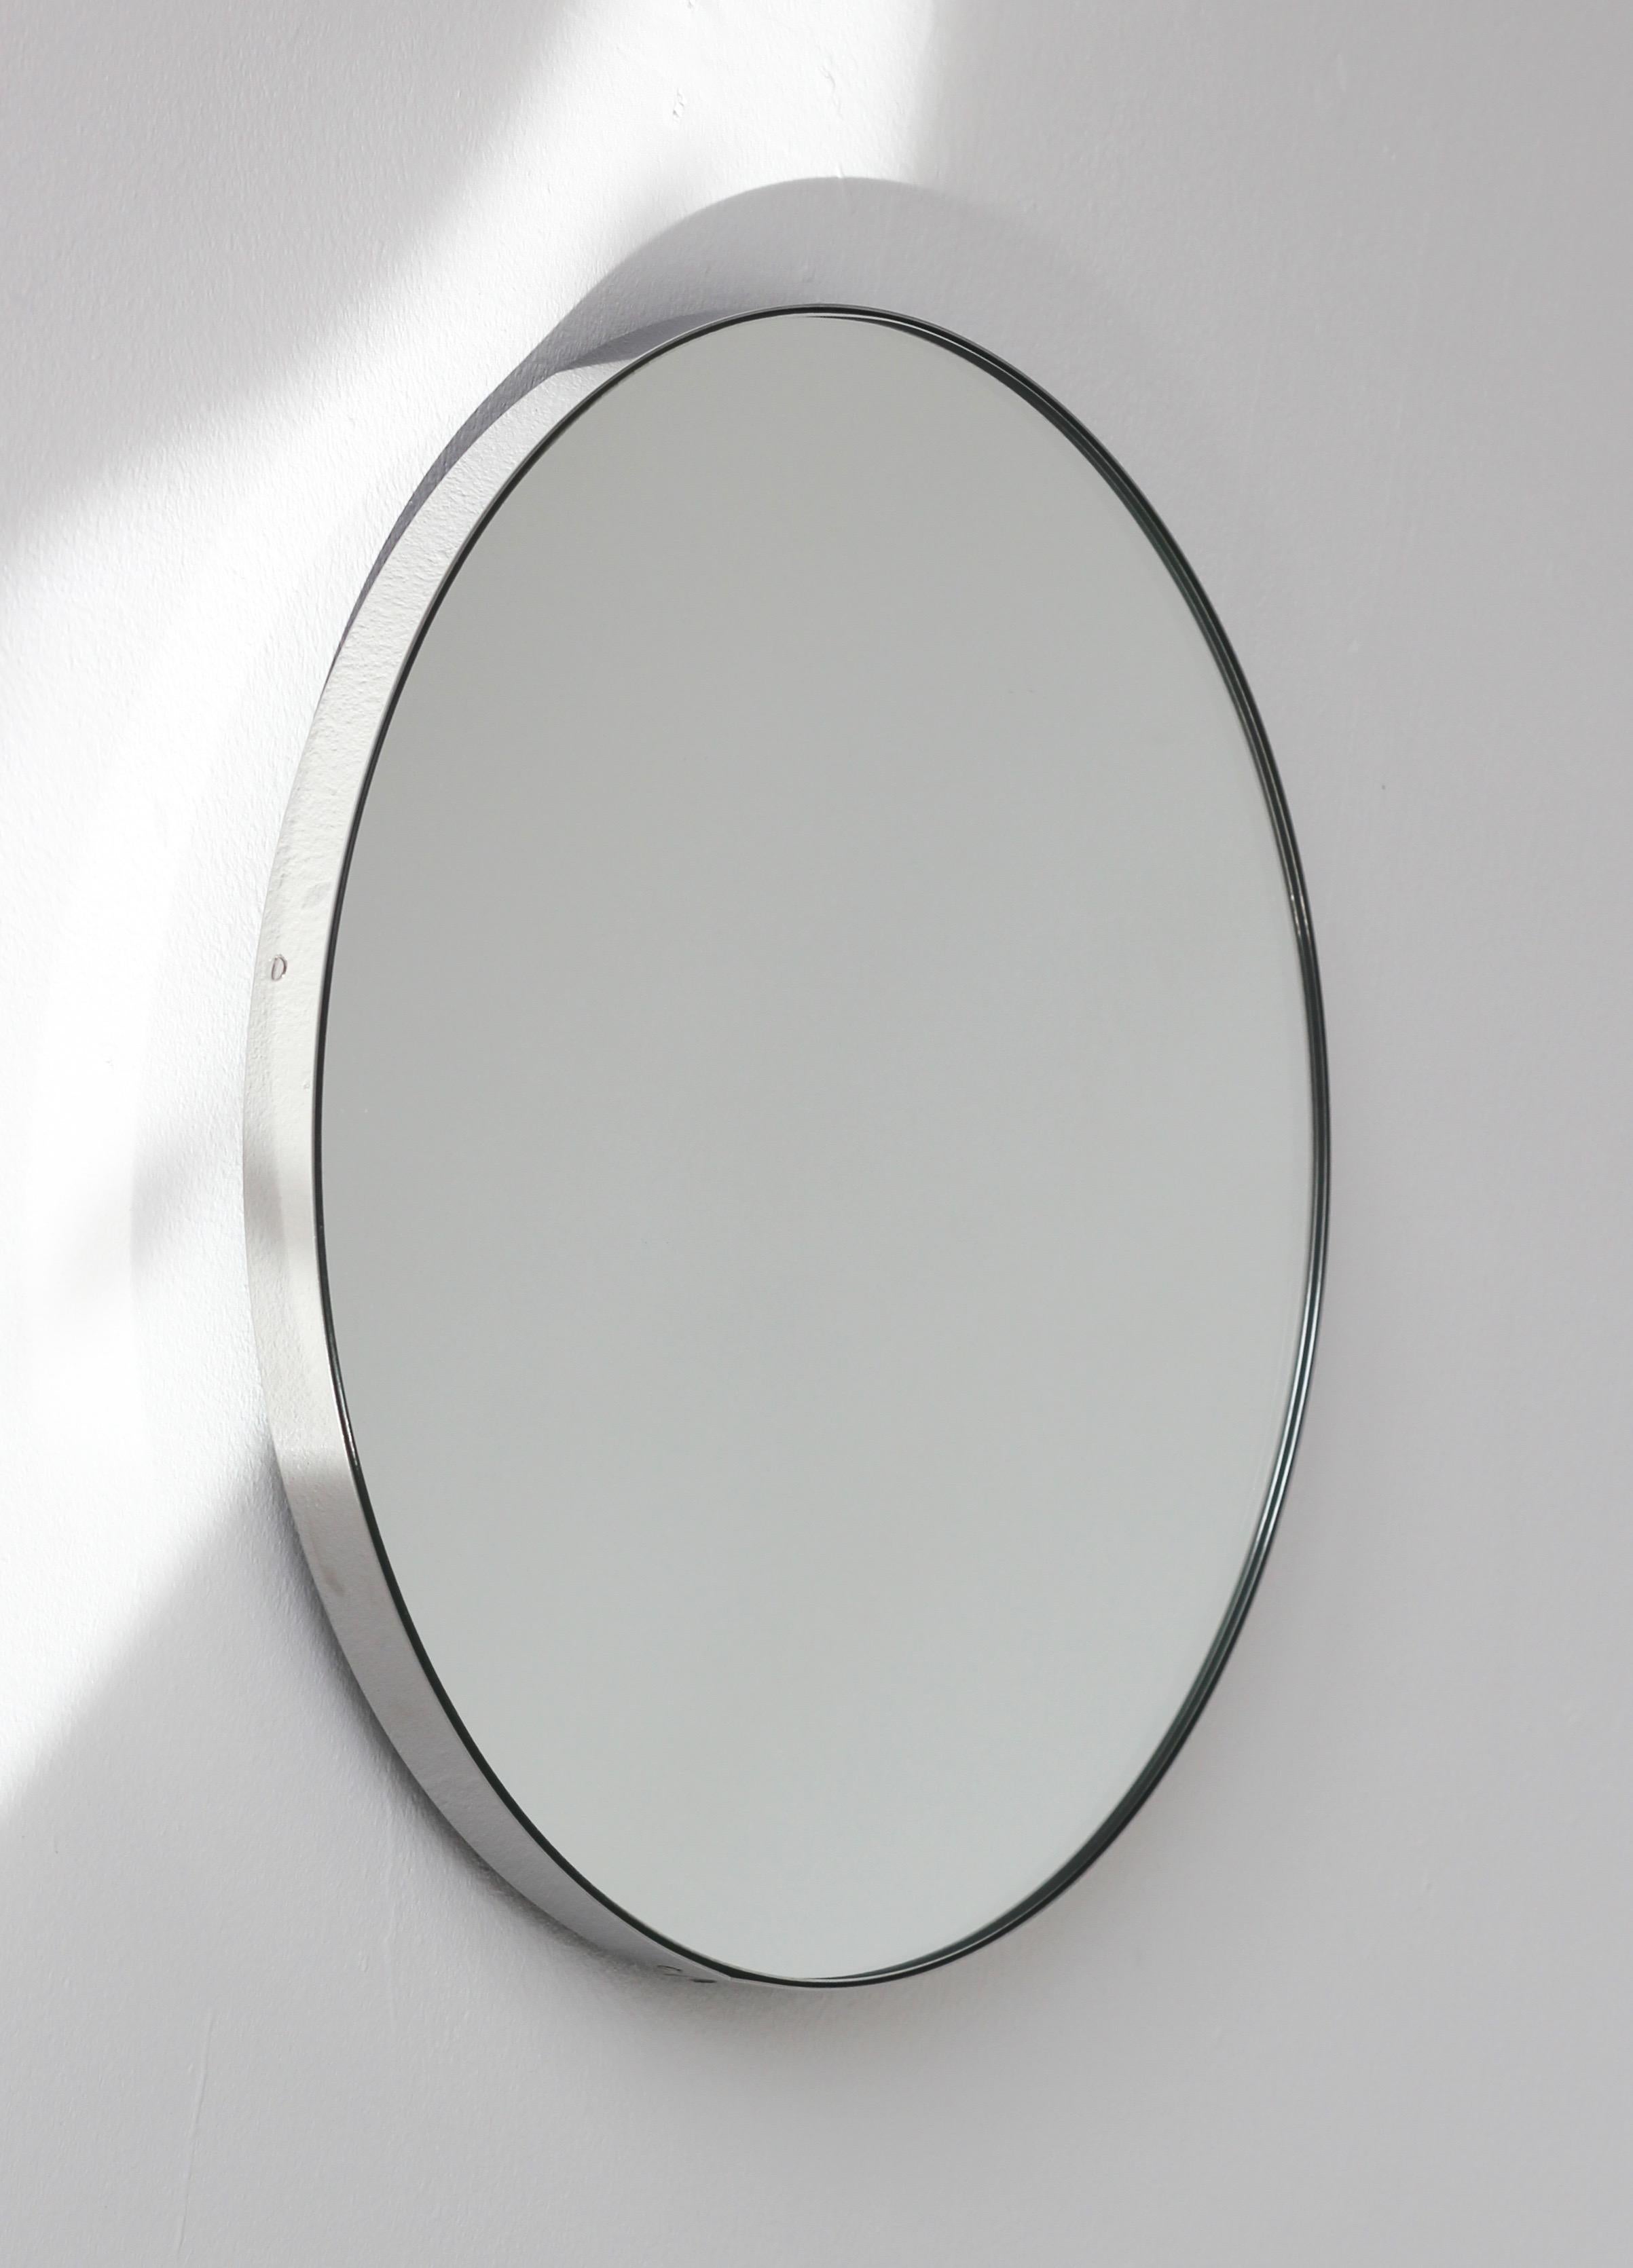 Orbis Round Modern Mirror with Stainless Steel Frame, Small In New Condition For Sale In London, GB